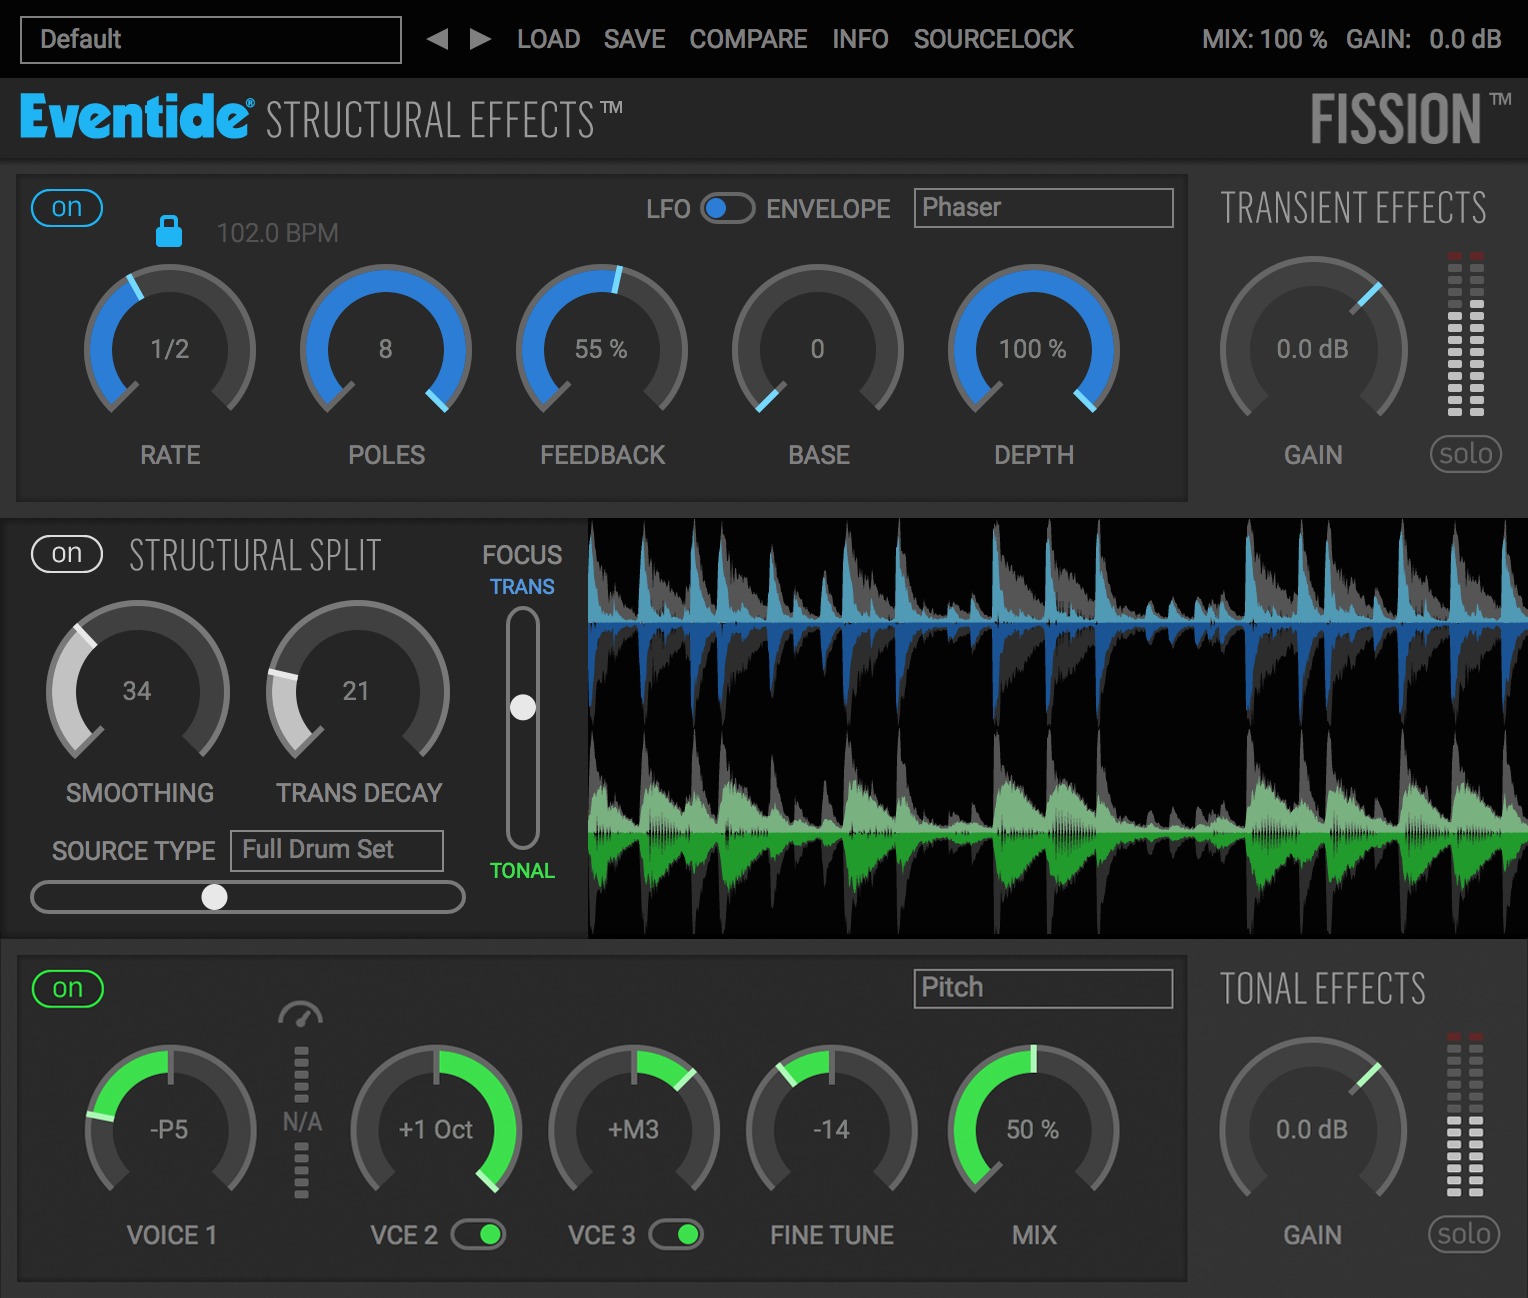 New Gear Alert: Innovative New “Fission” Plug-In from Eventide, Hot-British Tones from Radial, New Efficiencies from Waves & More